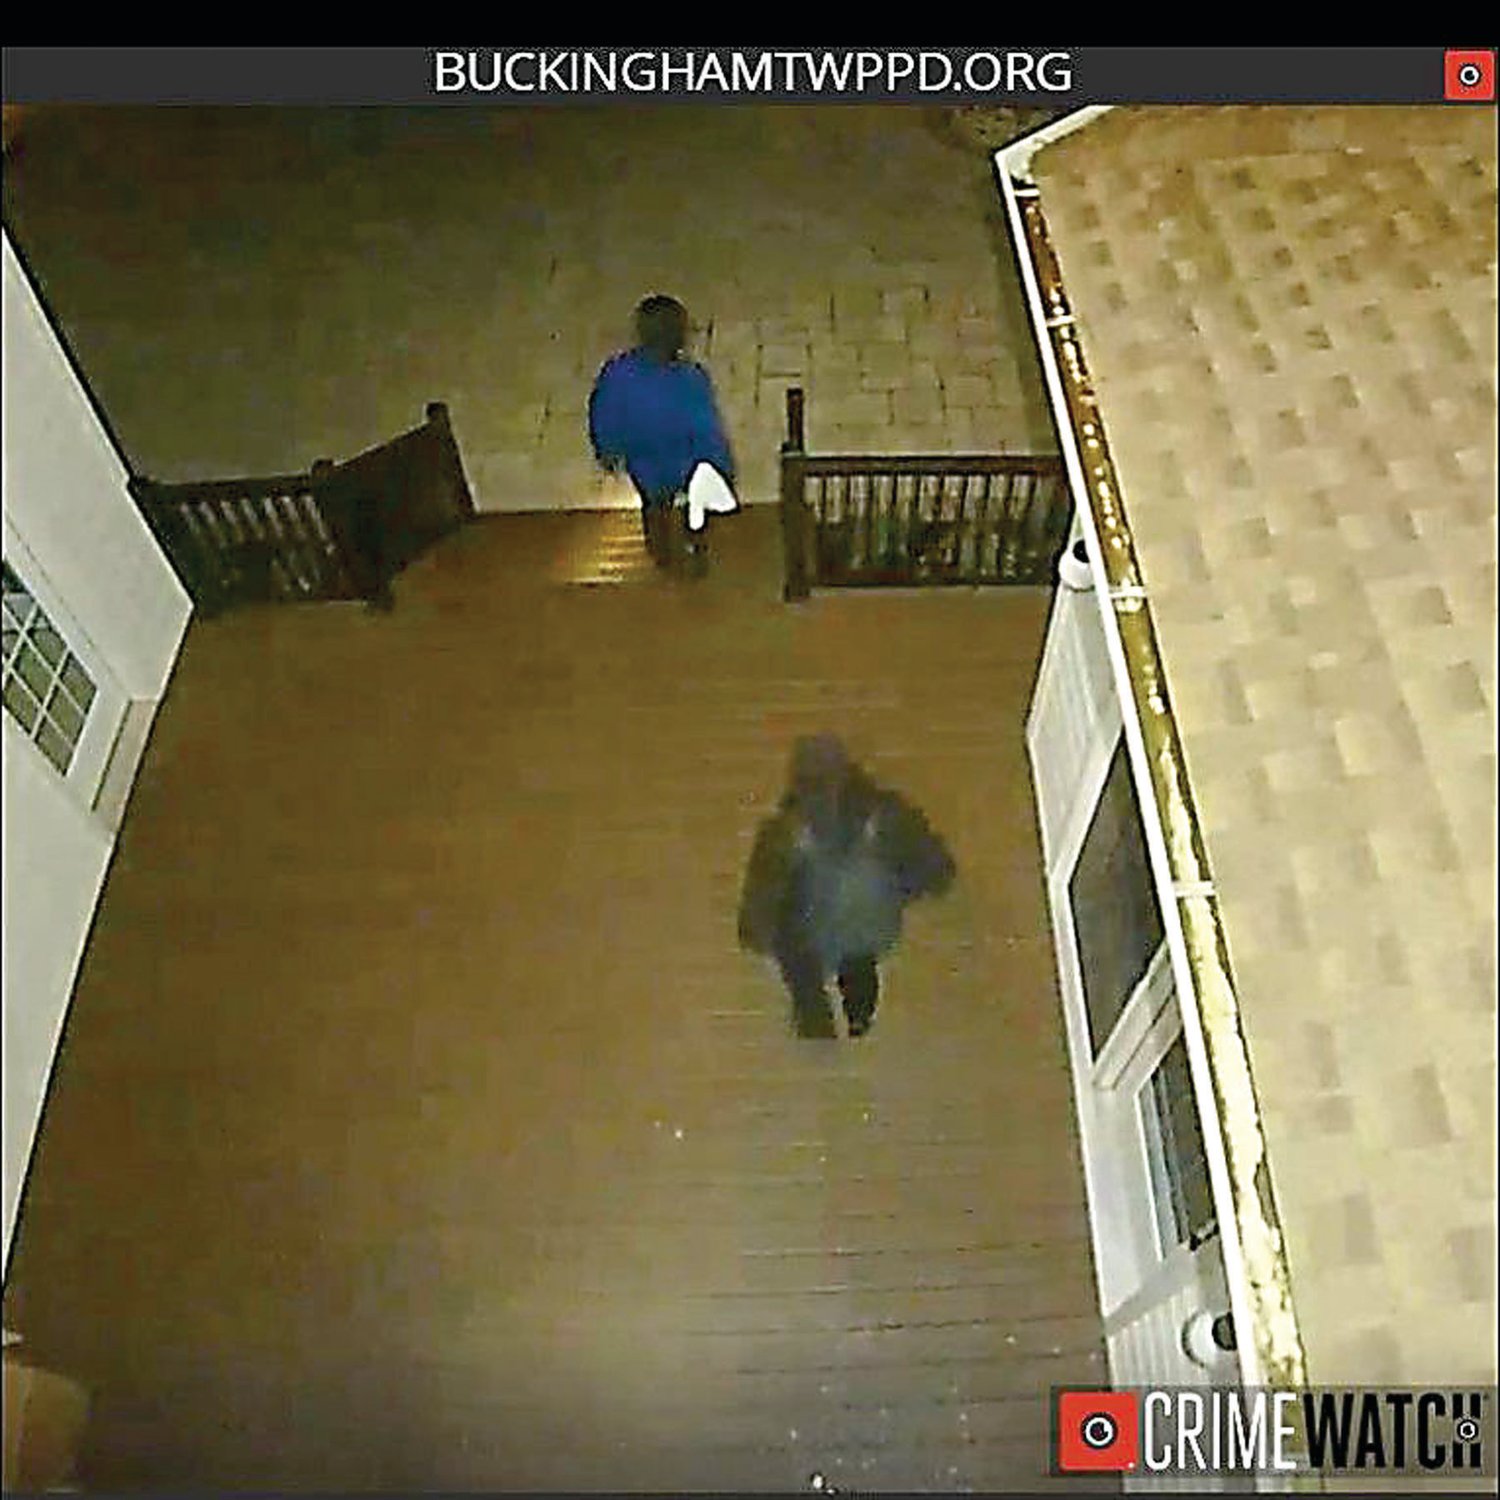 The suspects in two Buckingham burglaries were captured on surveillance video. Police are seeking information about their identities.